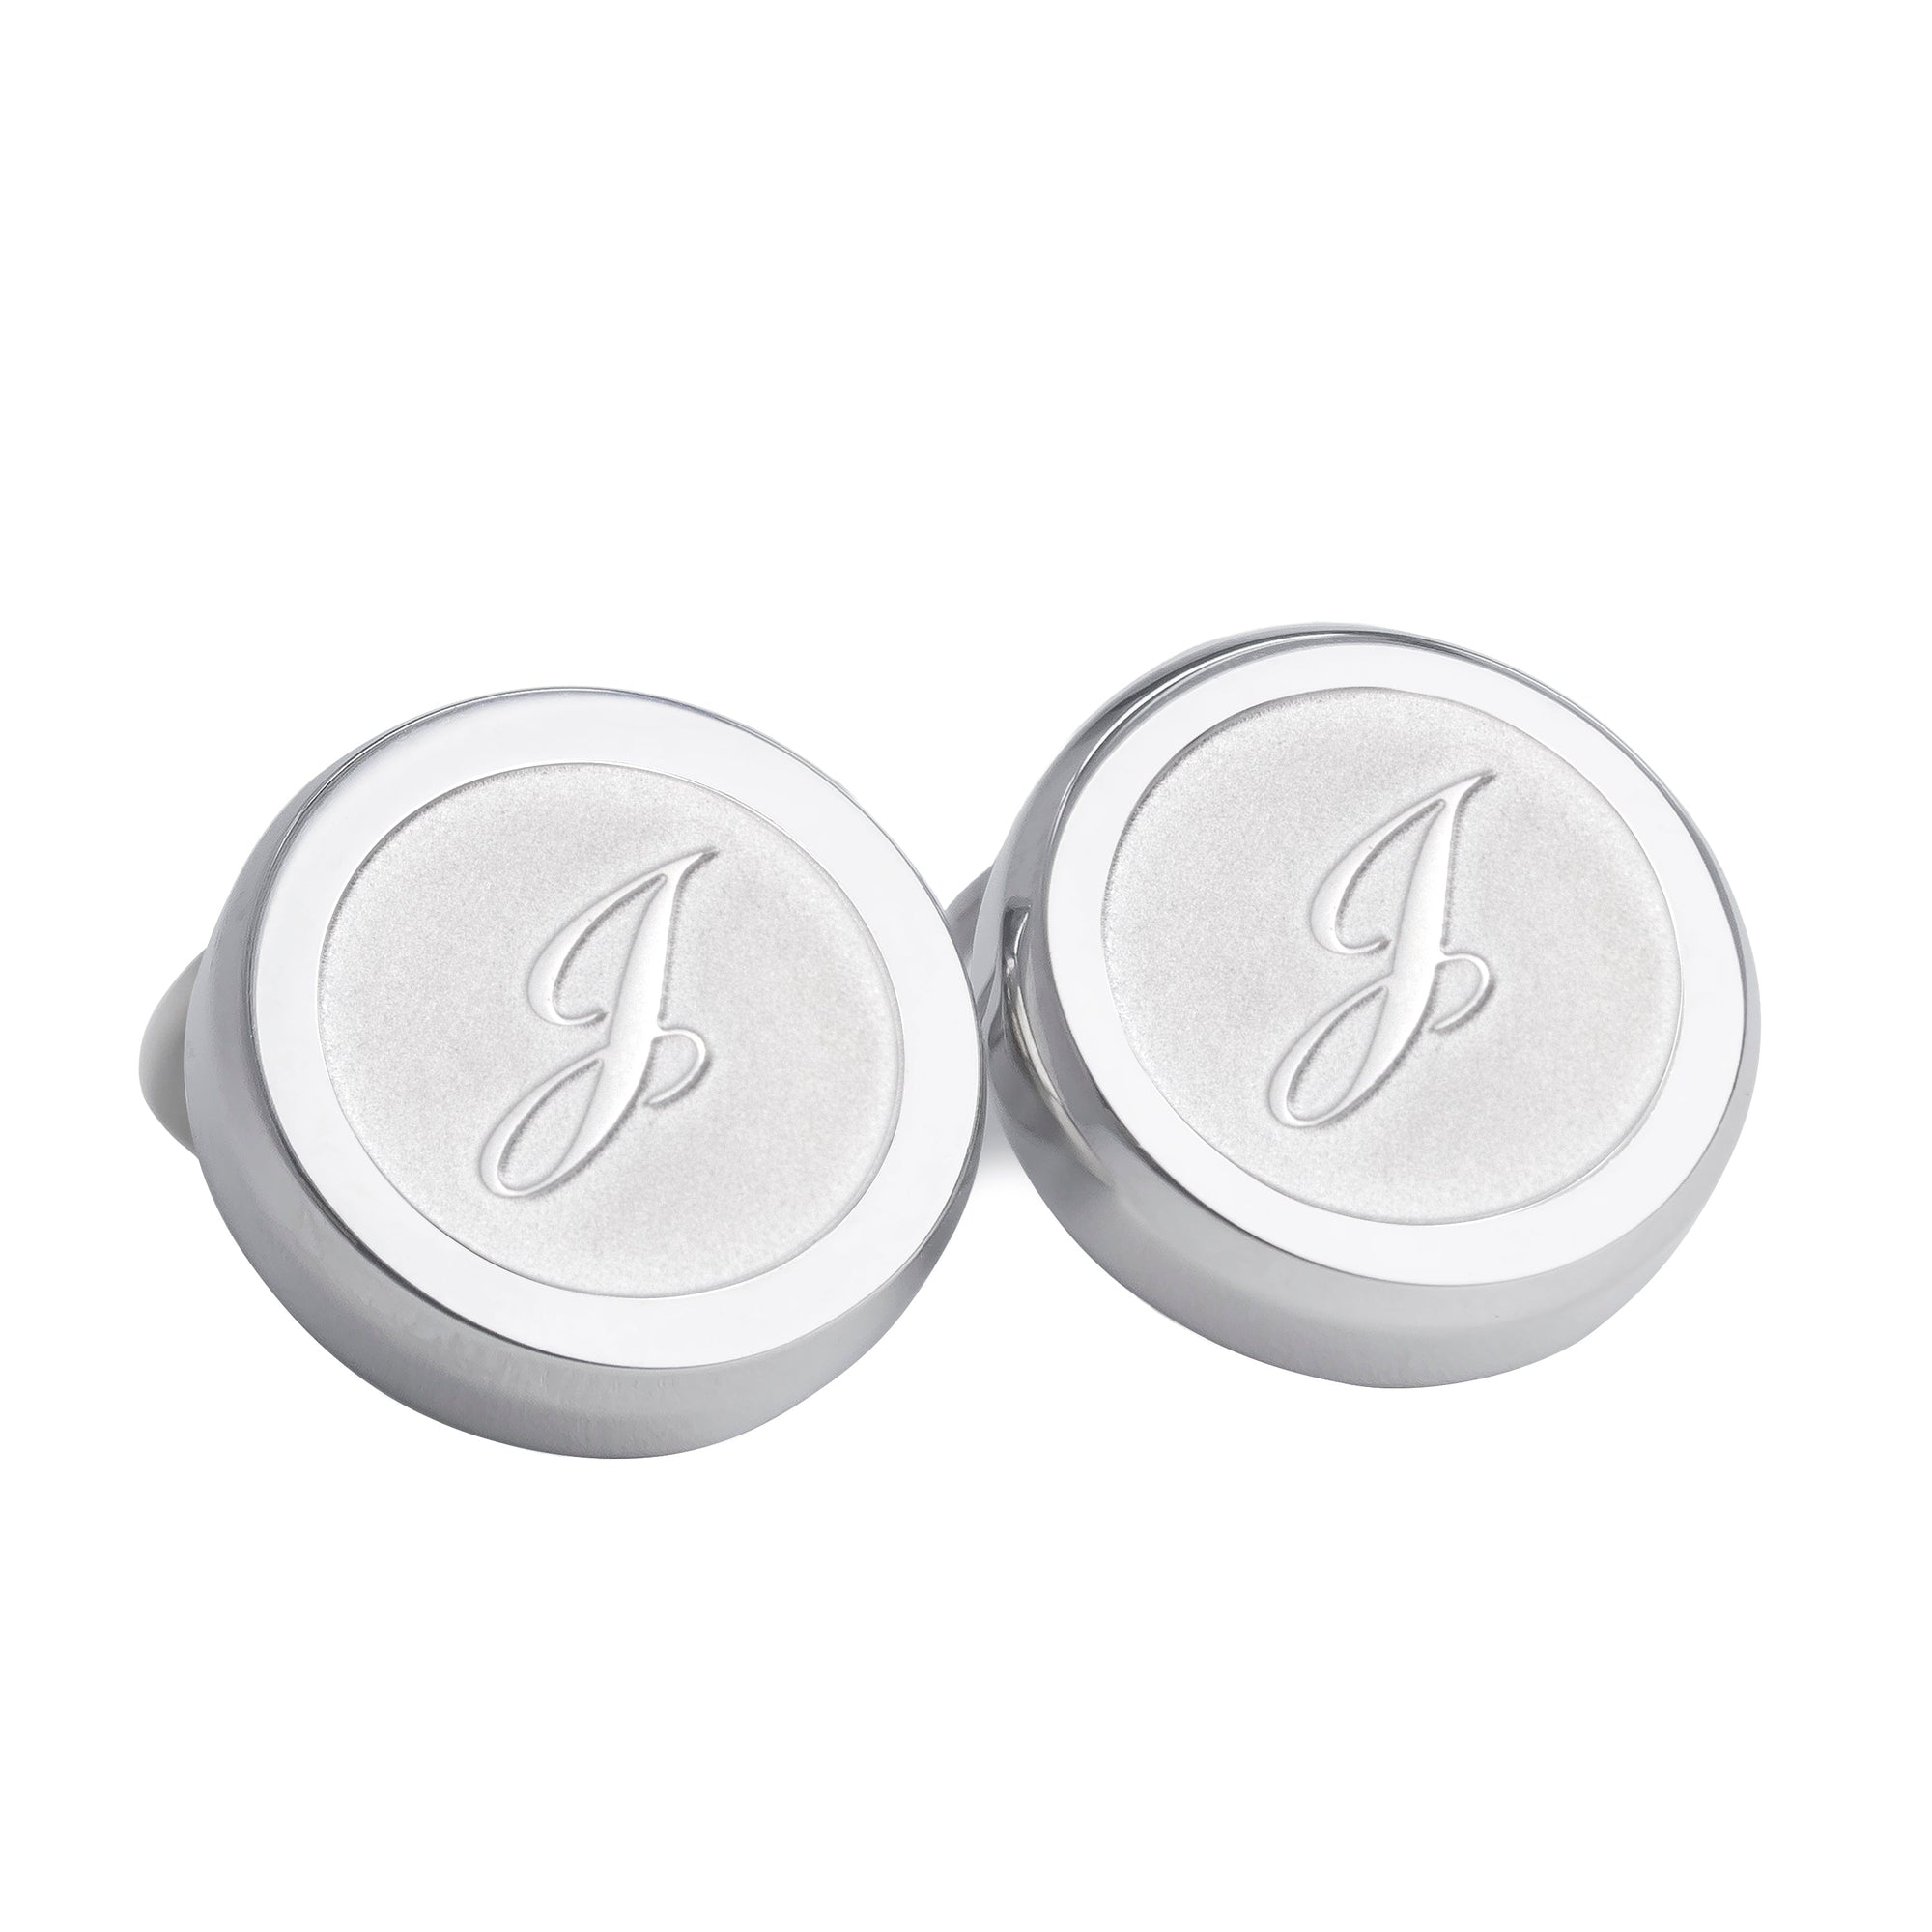 Monogram Etched Silver Clip-on Button Covers-Button Covers-A.Azthom-J-Cufflinks.com.sg